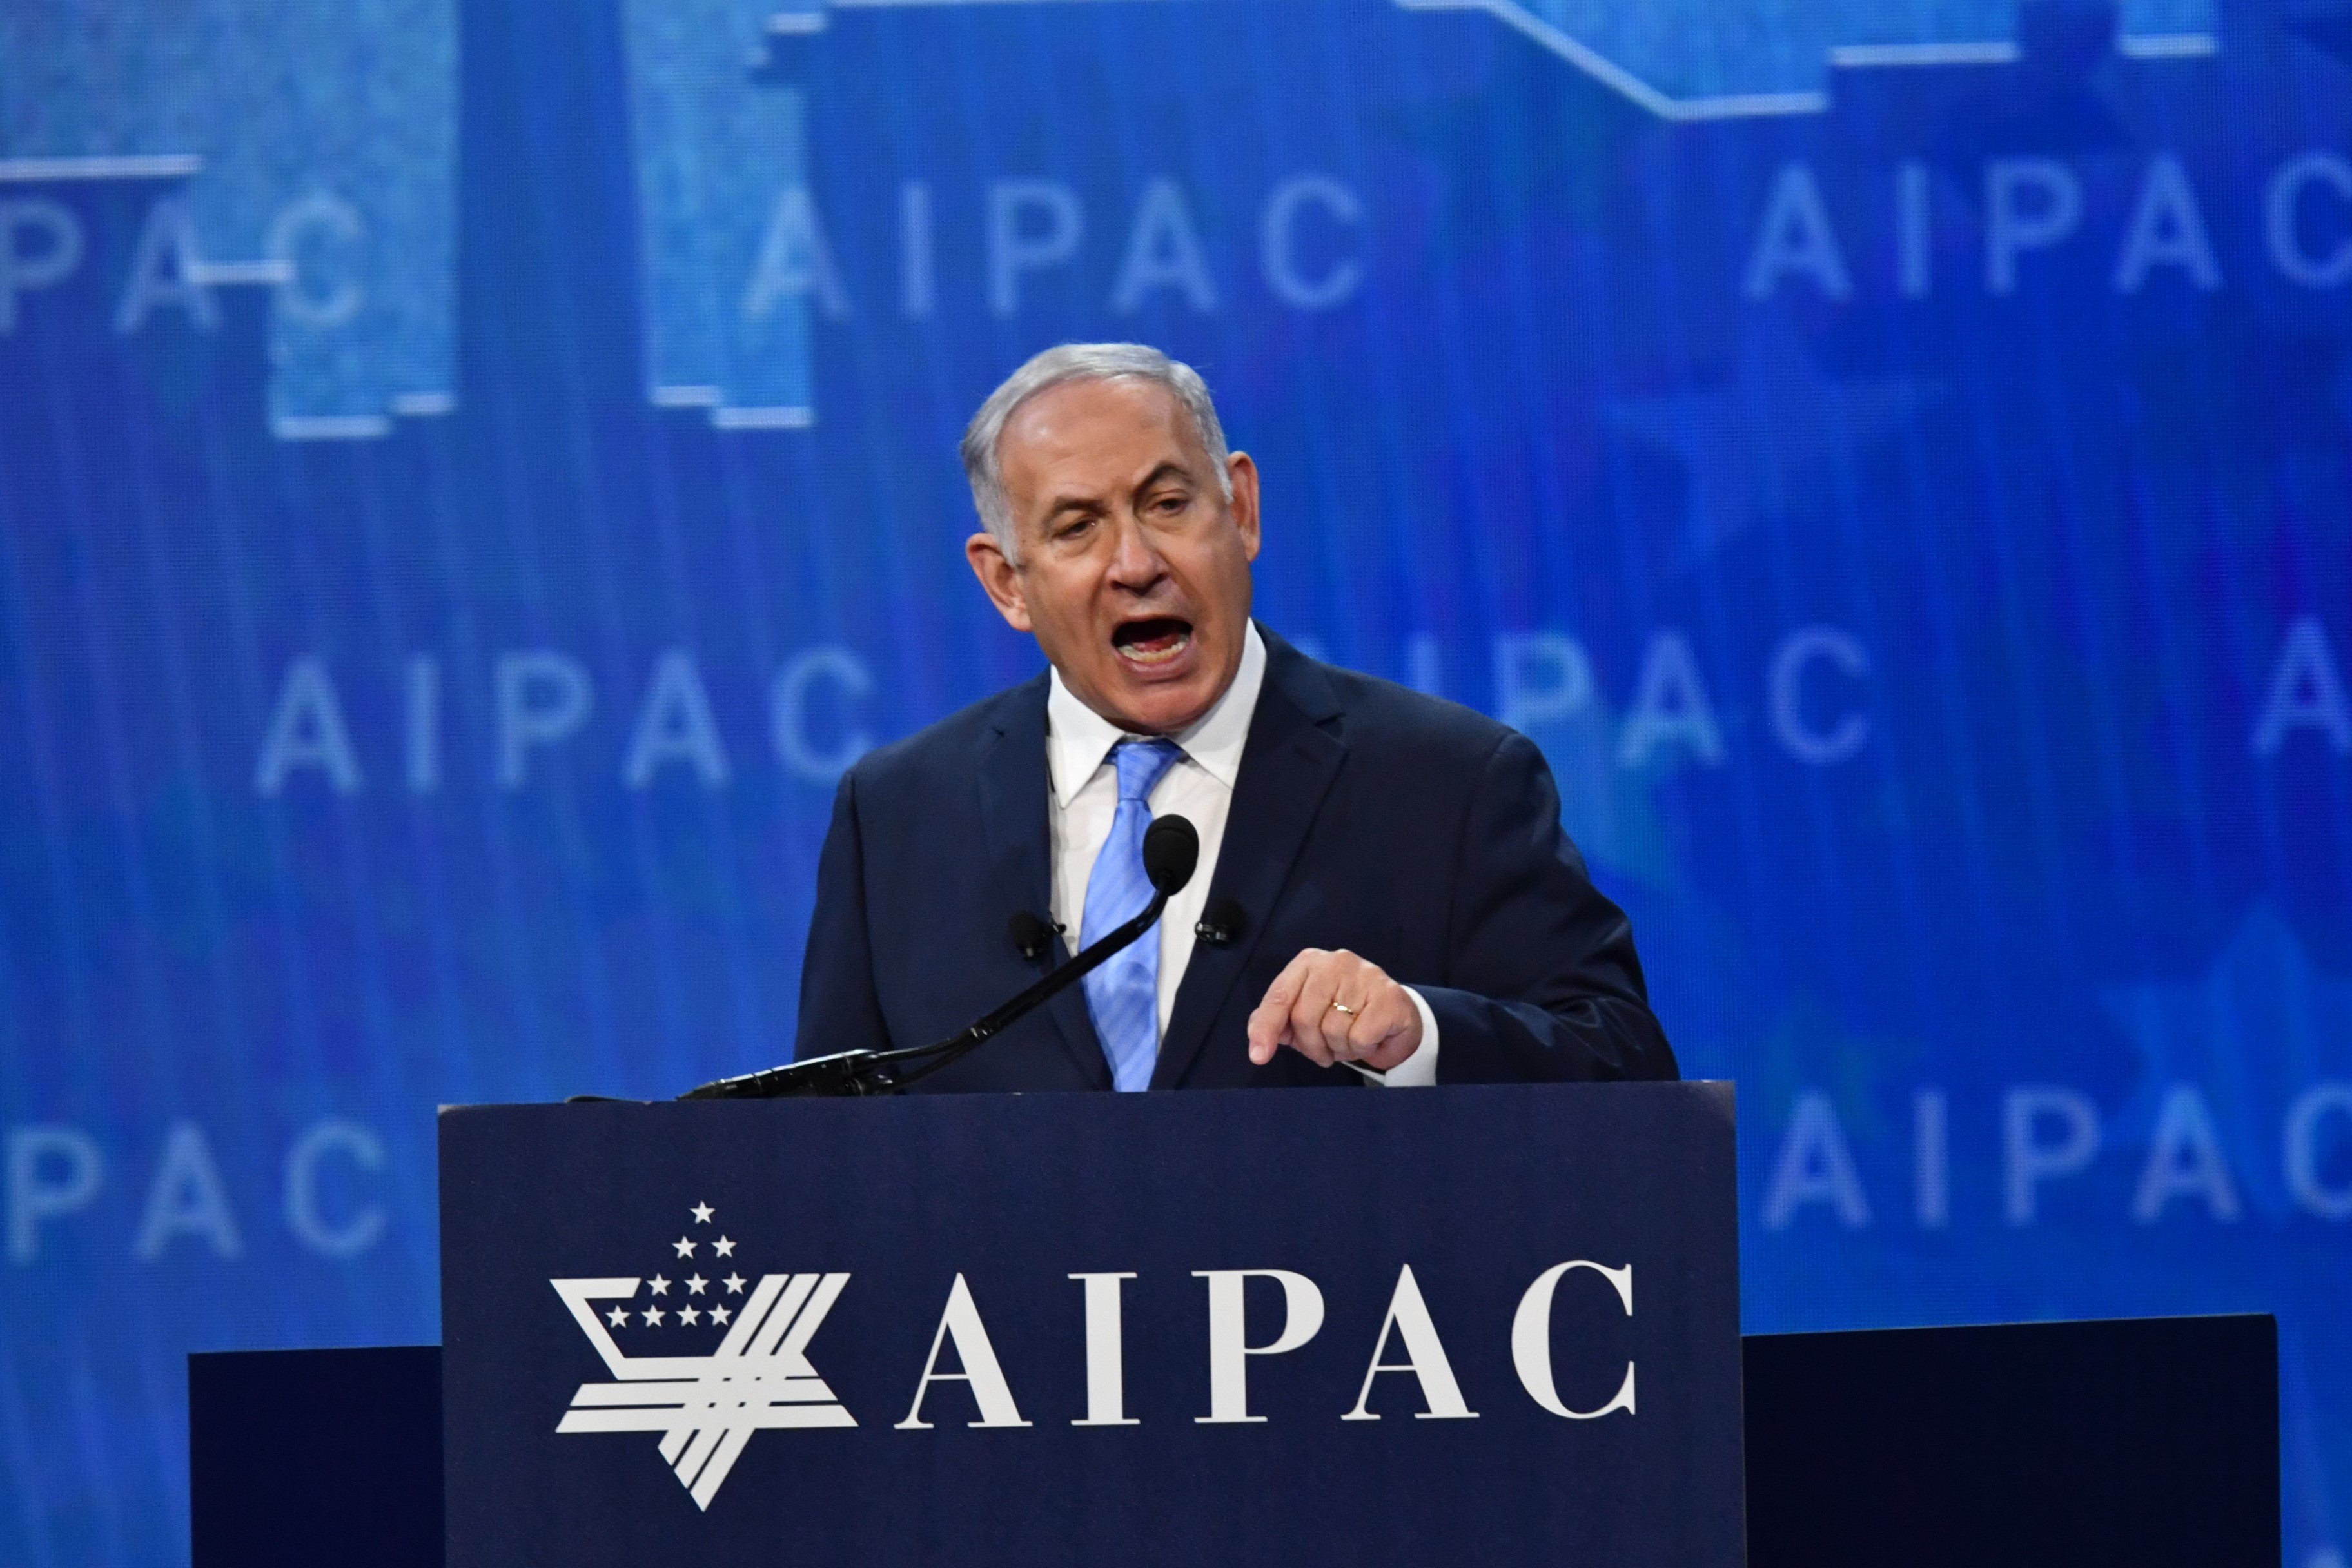 Israeli Prime Minister Benjamin Netanyahu speaks during AIPAC policy conference in Washington, DC, on 6 March 2018 (AFP)